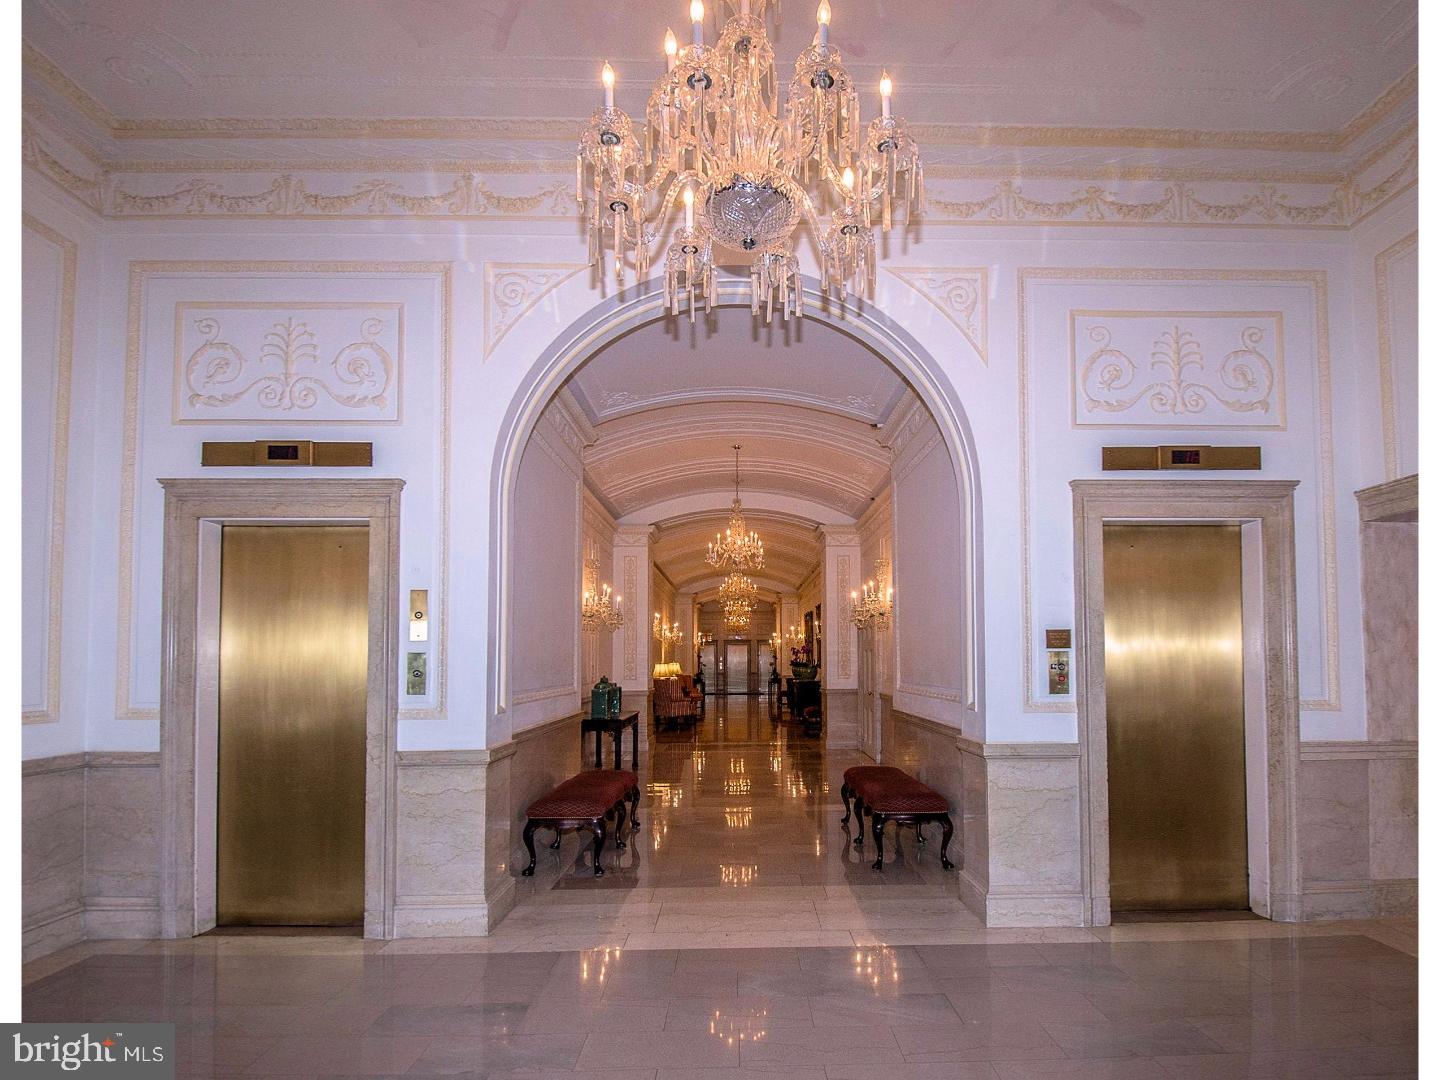 a view of a hallway with chandelier